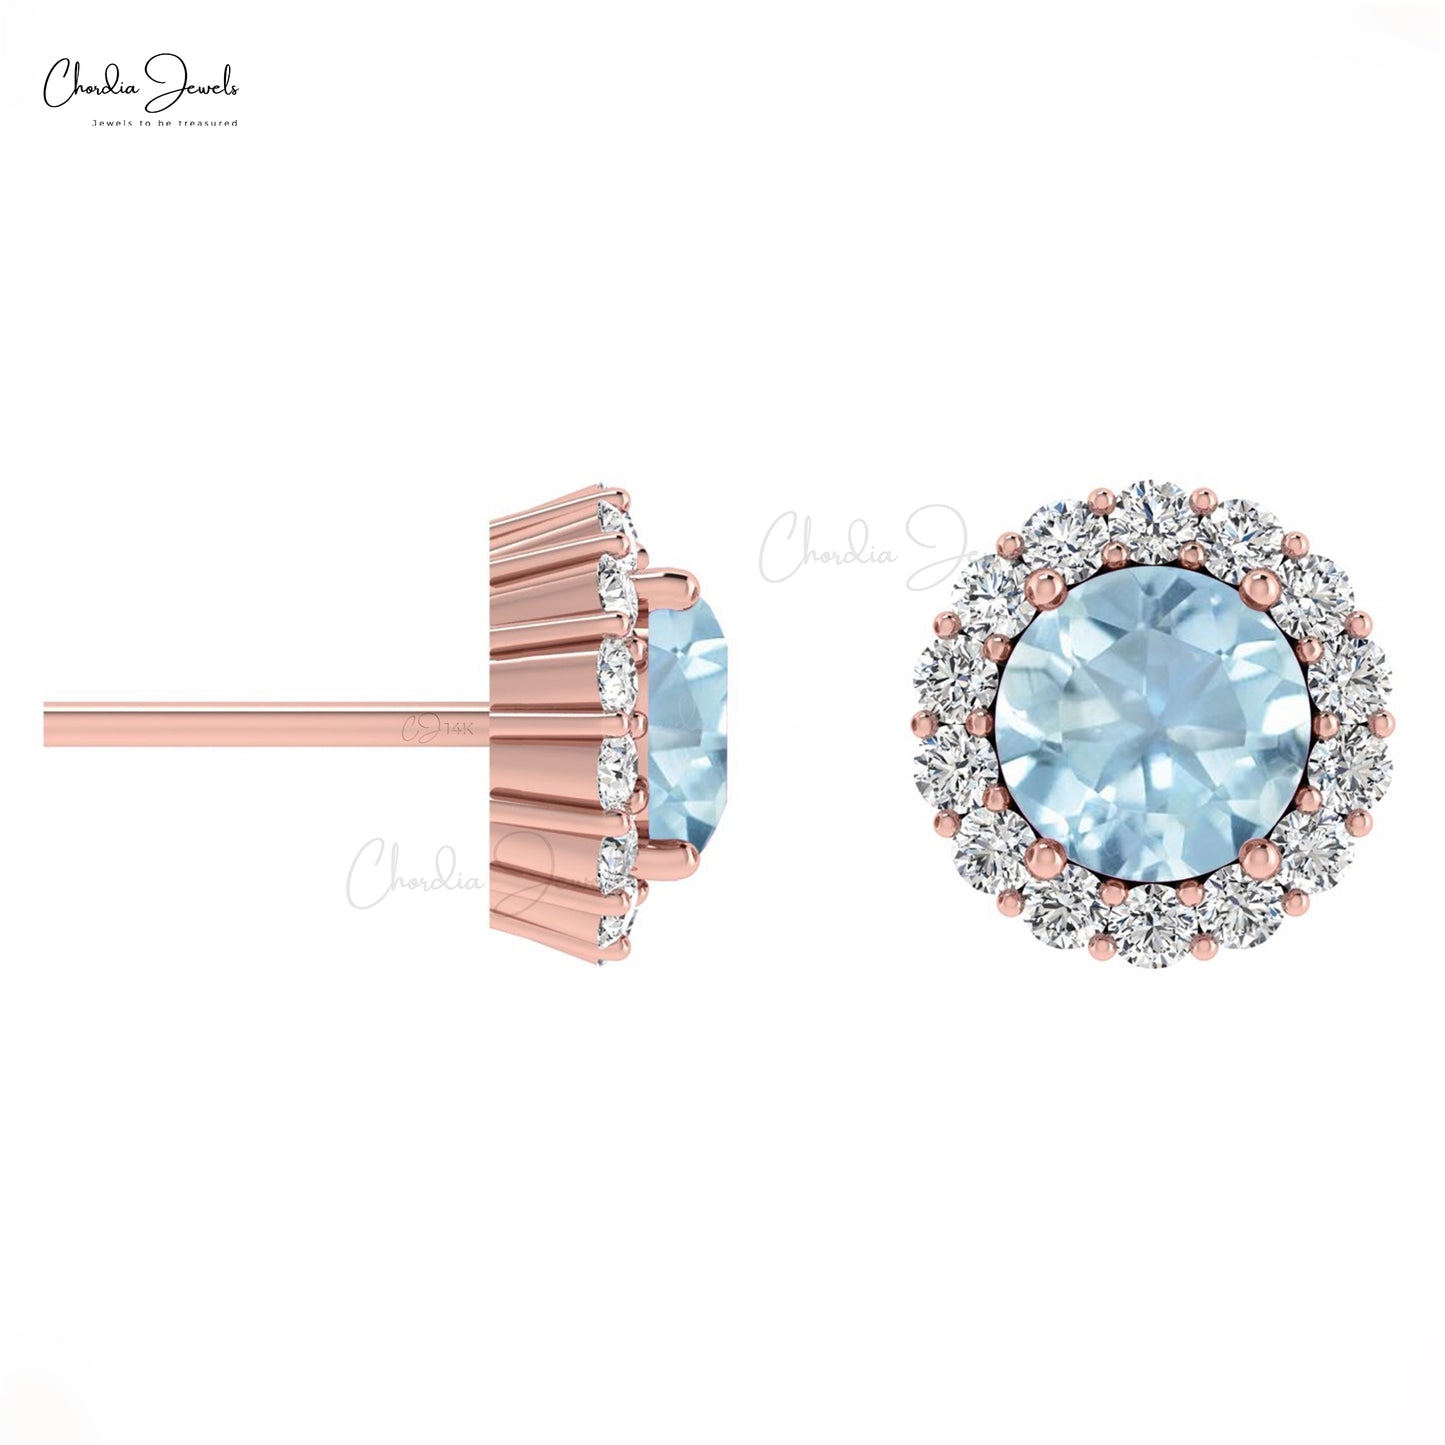 Load image into Gallery viewer, Brilliant Cut Diamond Halo Earring with Round Cut Aquamarine Stone
